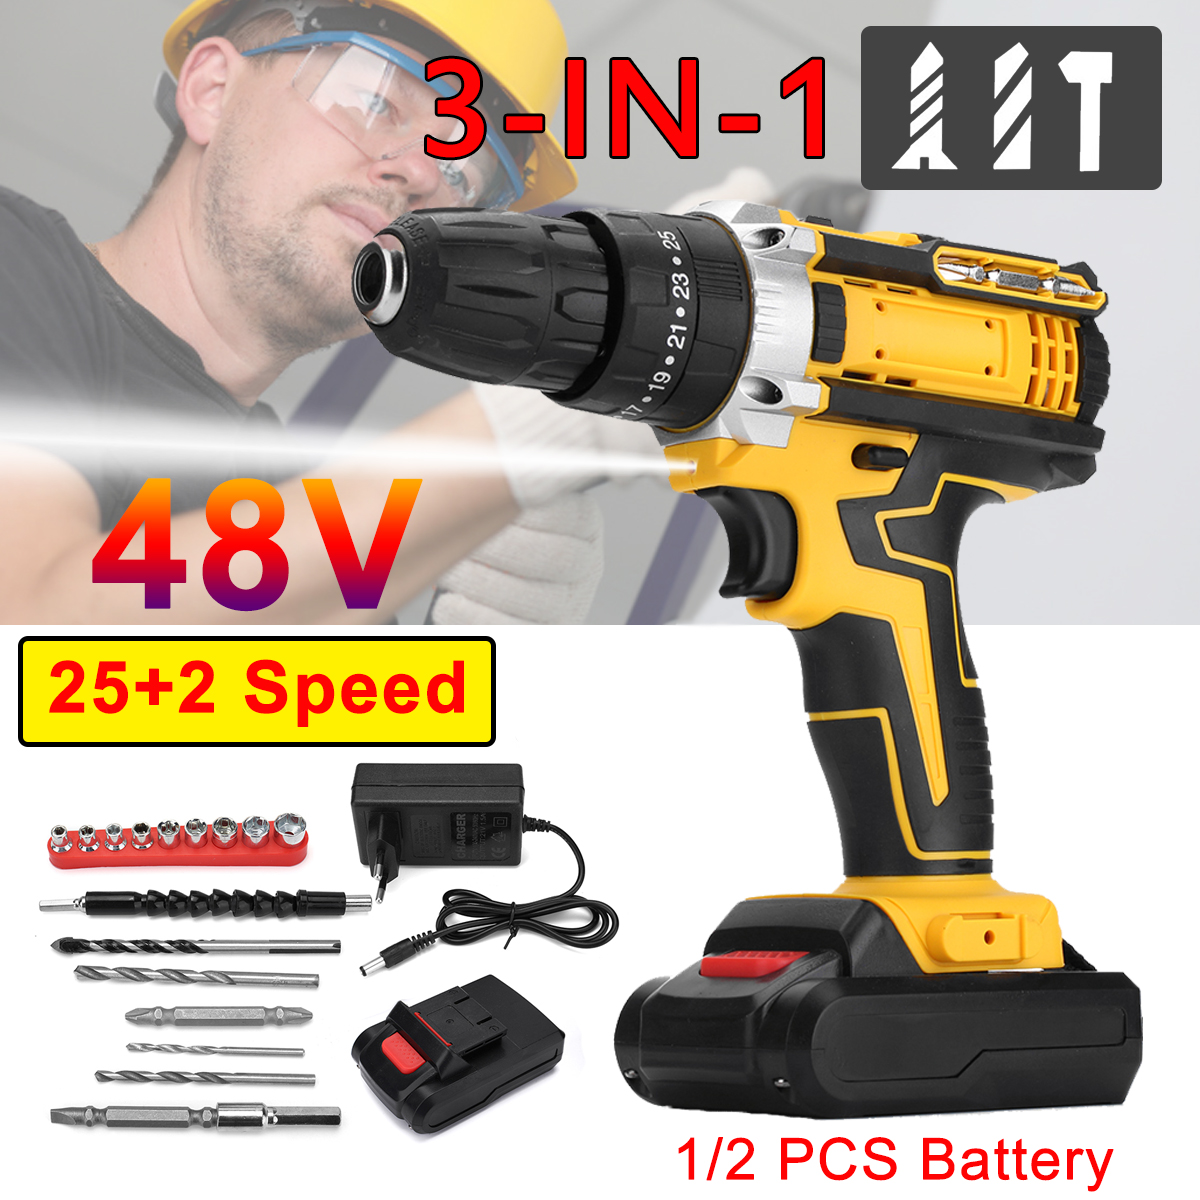 3-IN-1-Electric-Cordless-Impact-Hammer-Drill-Screwdriver-38Nm-High-Torque-Tool-1780452-1